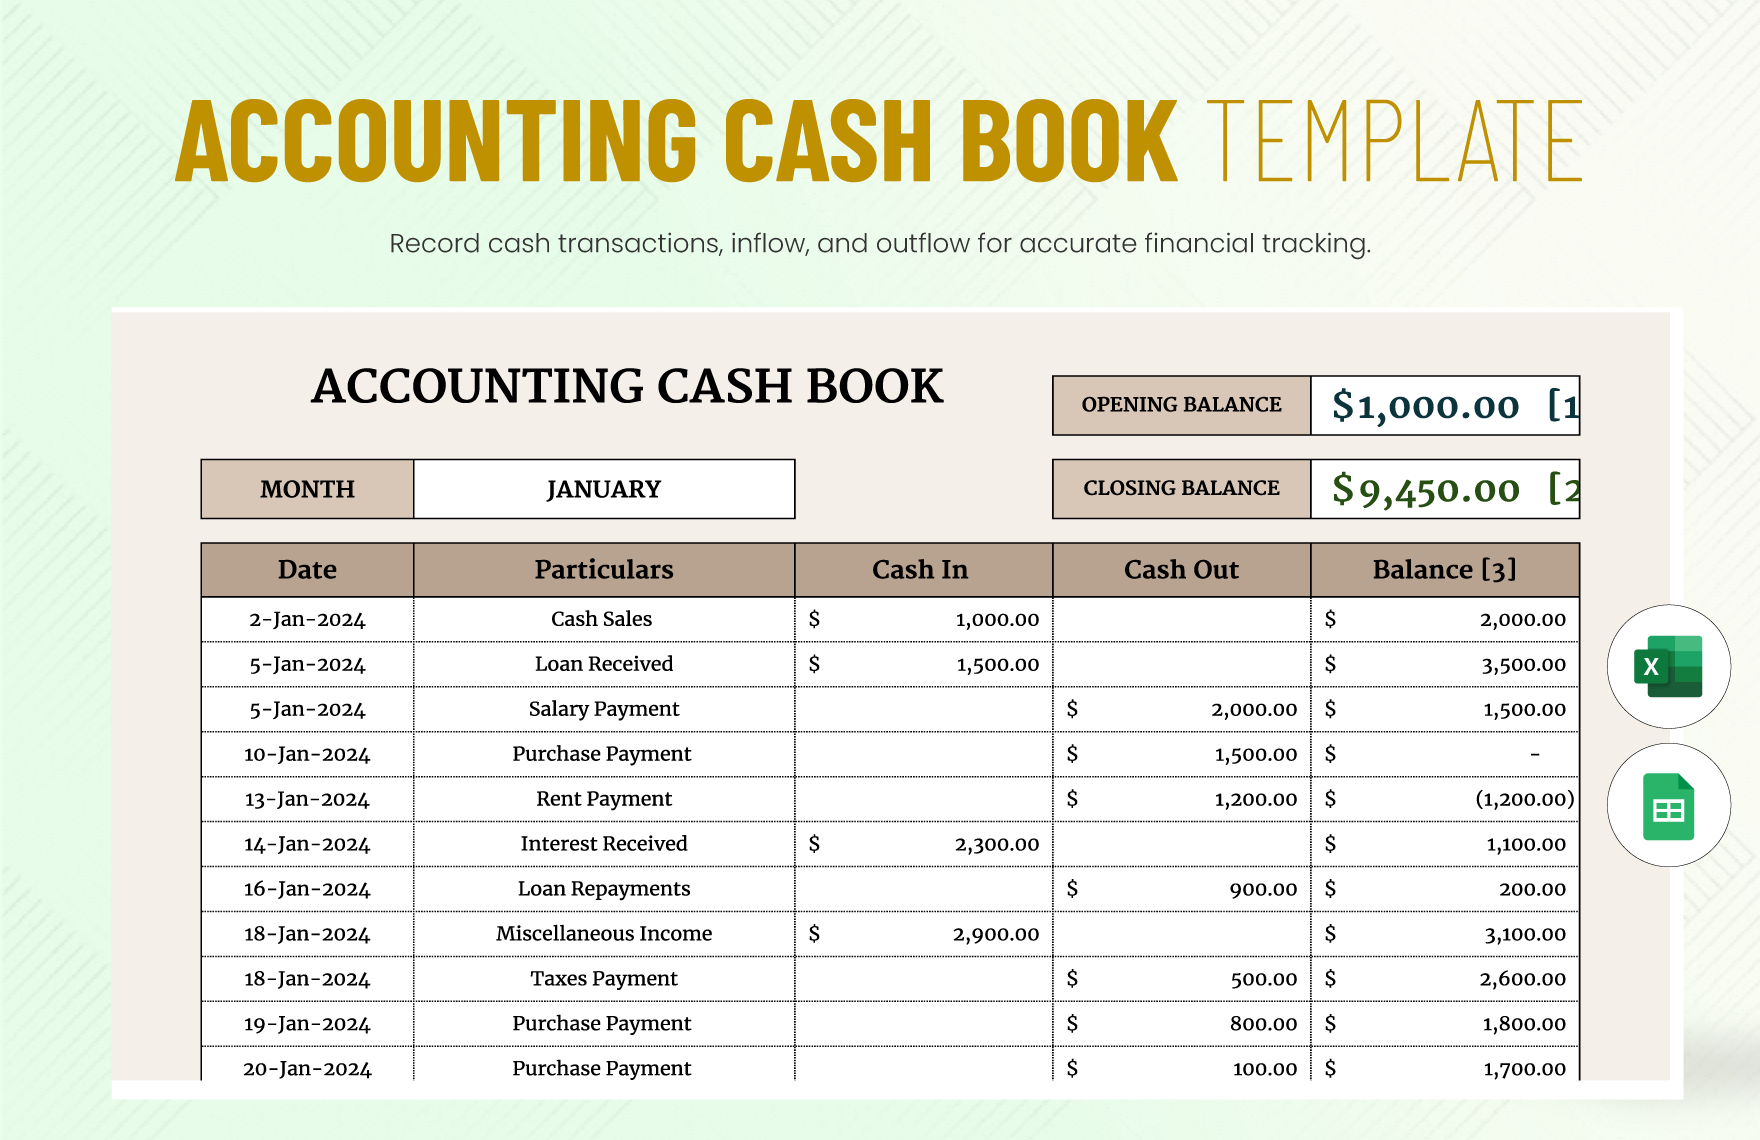 Accounting Cash Book Template